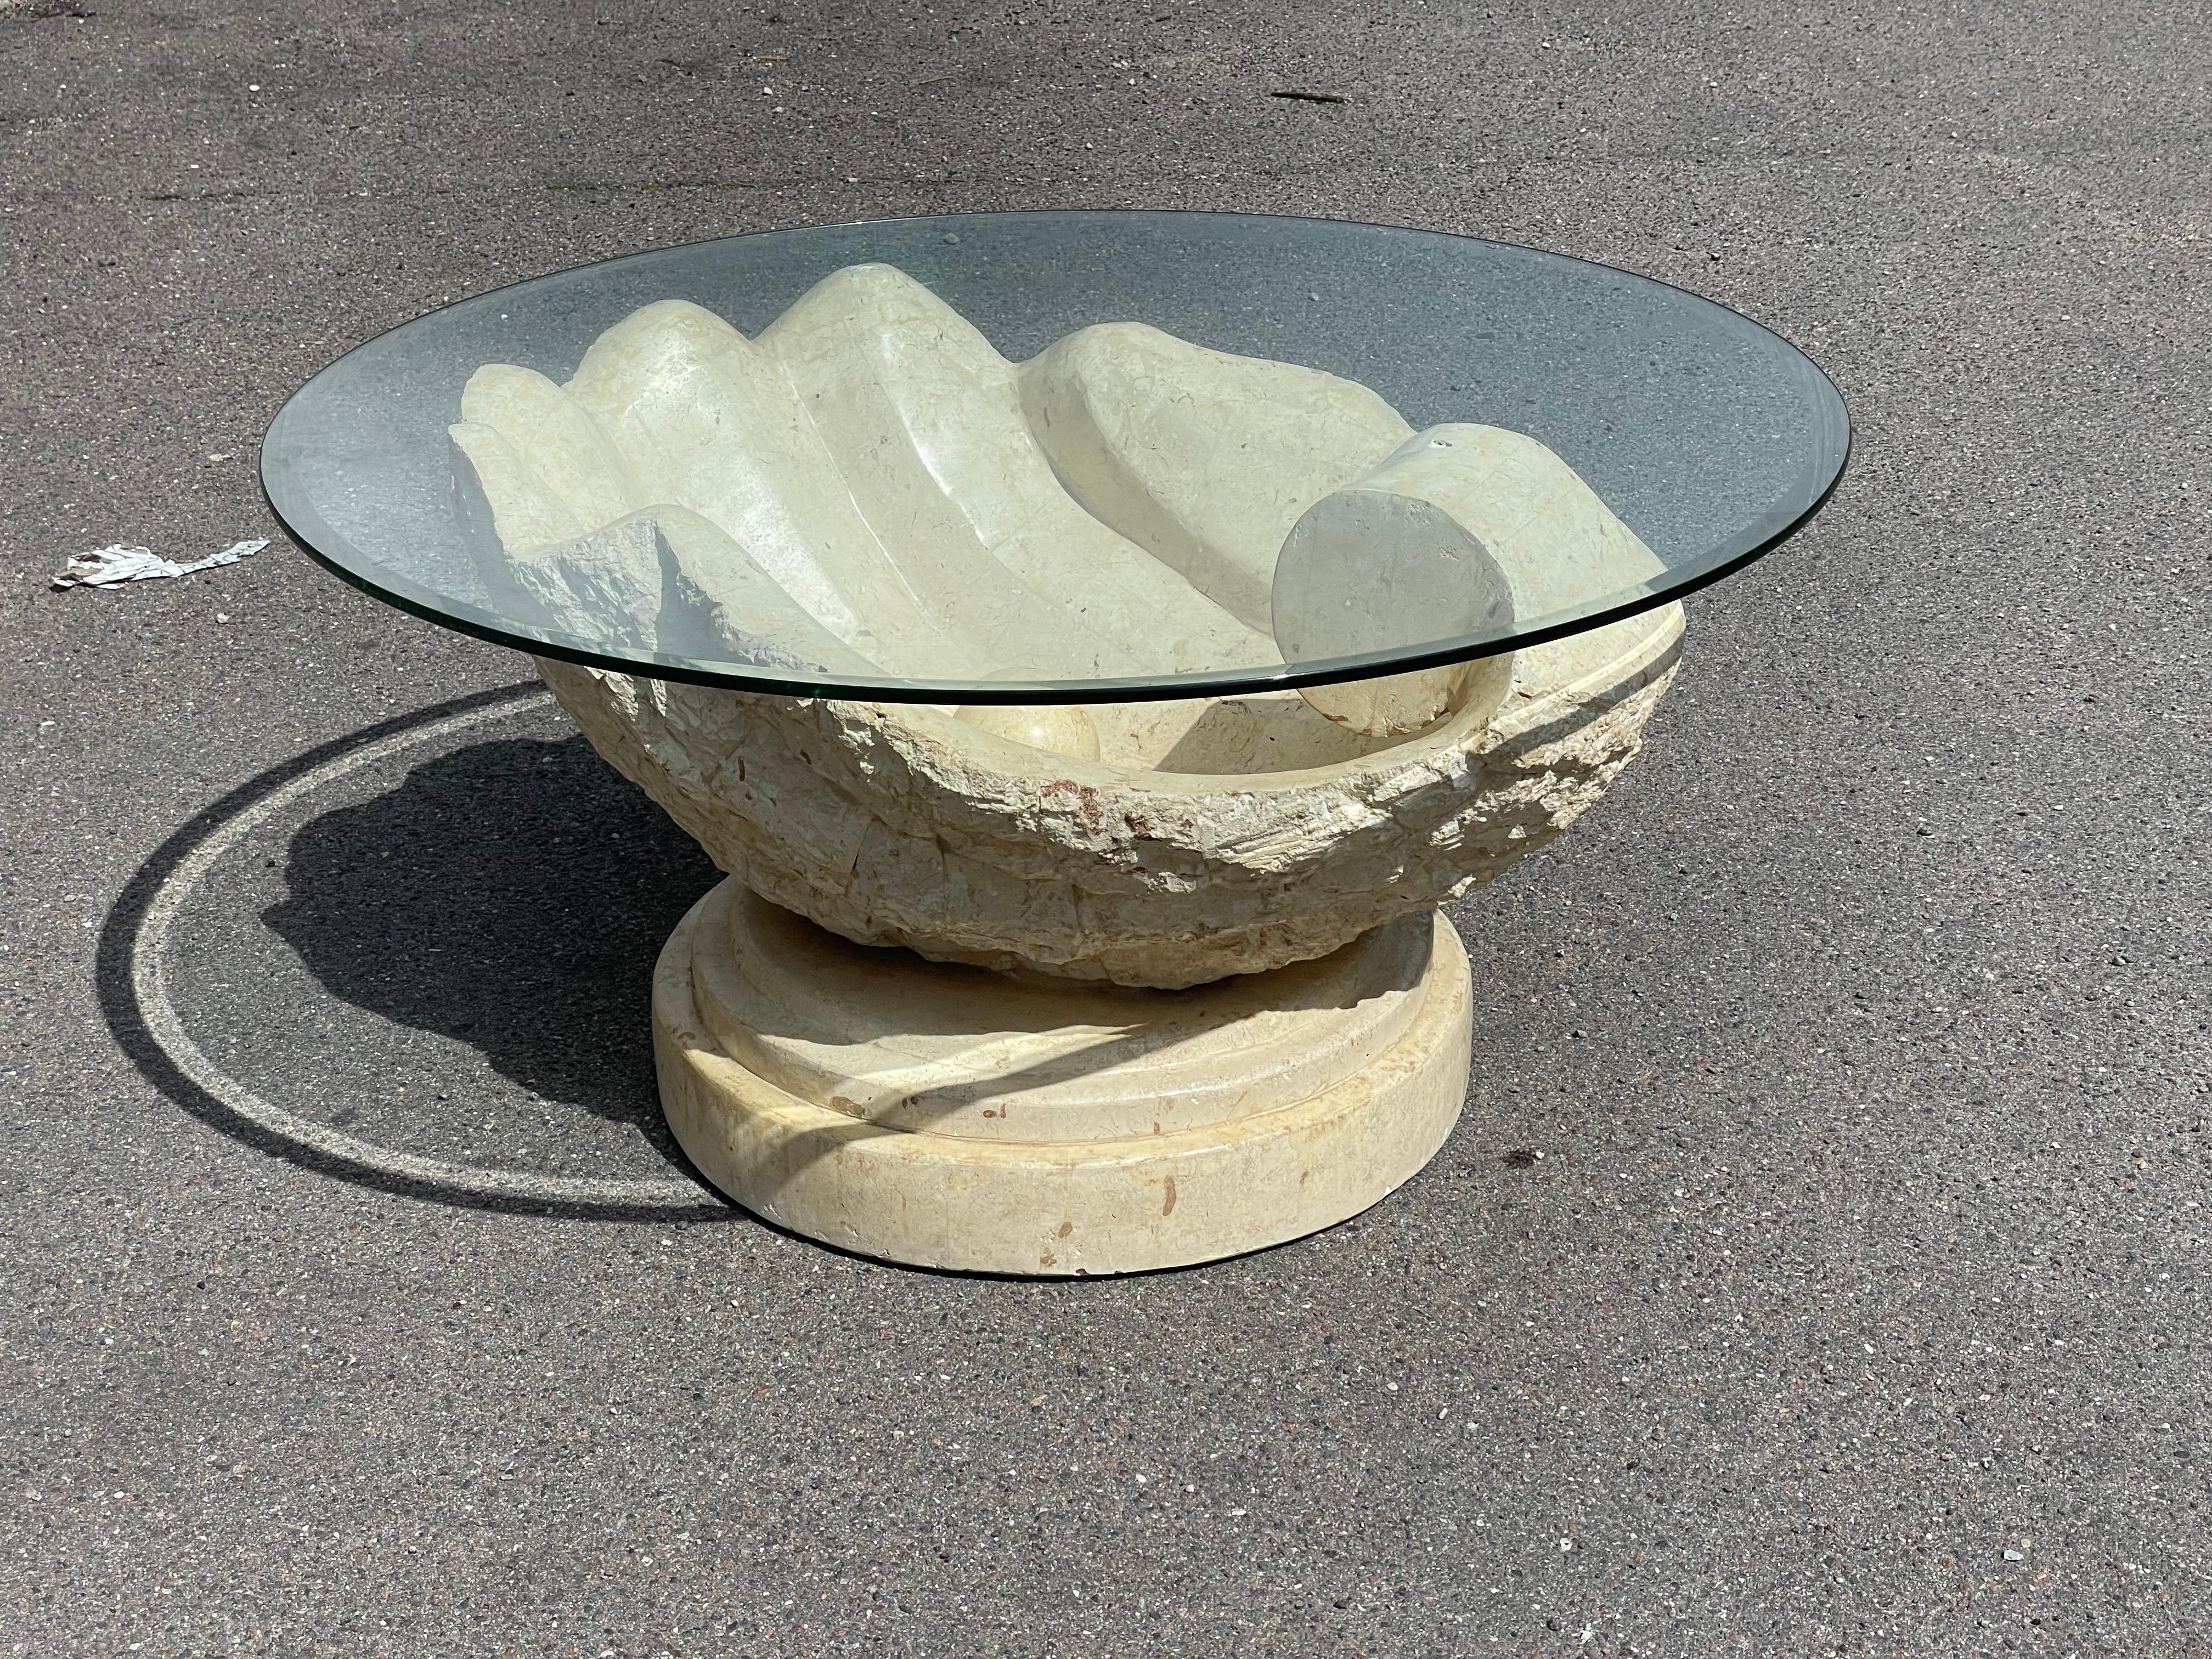 Step back in time with the Magnussen Ponte coffee table from the 1980s. Inspired by the elegance of an oyster with a hidden pearl, this masterpiece is crafted from exquisite Mactan stone. The round glass top, skillfully facet cut, adds a touch of